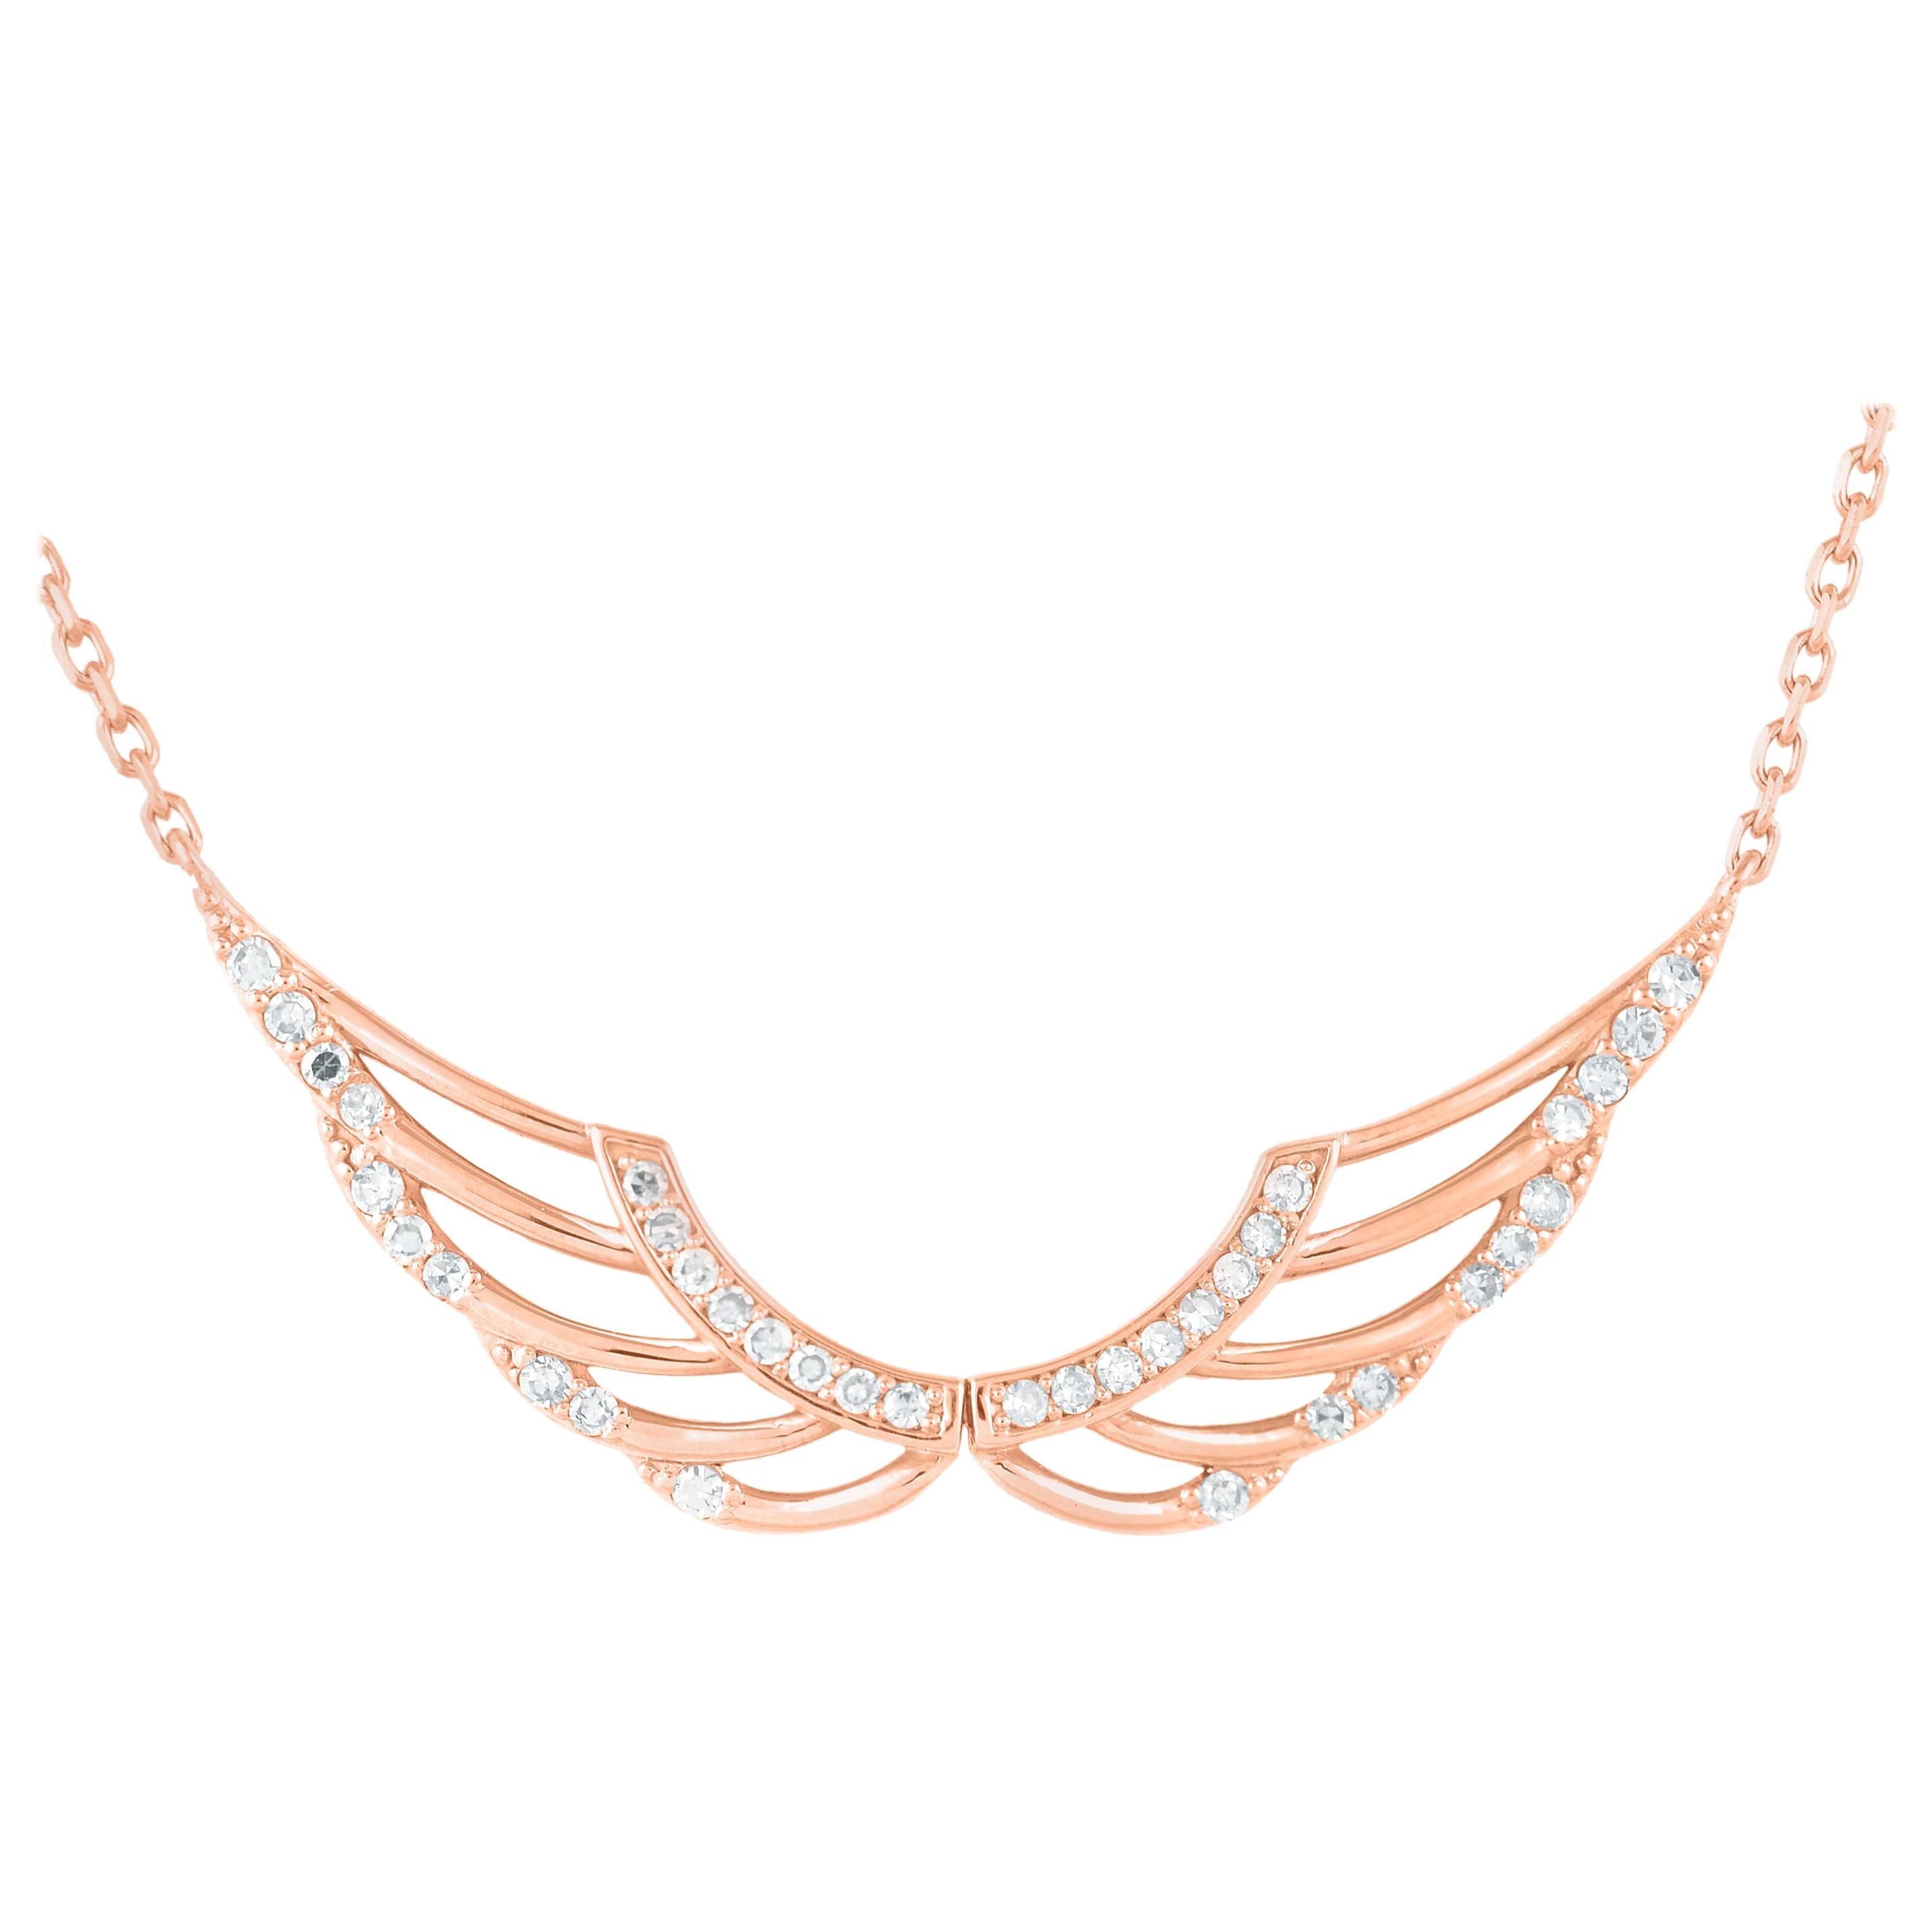 TJD 0.25 Carat Round Diamond 14Kt Rose Gold Angel Wings Fashion Necklace Pendant For Sale